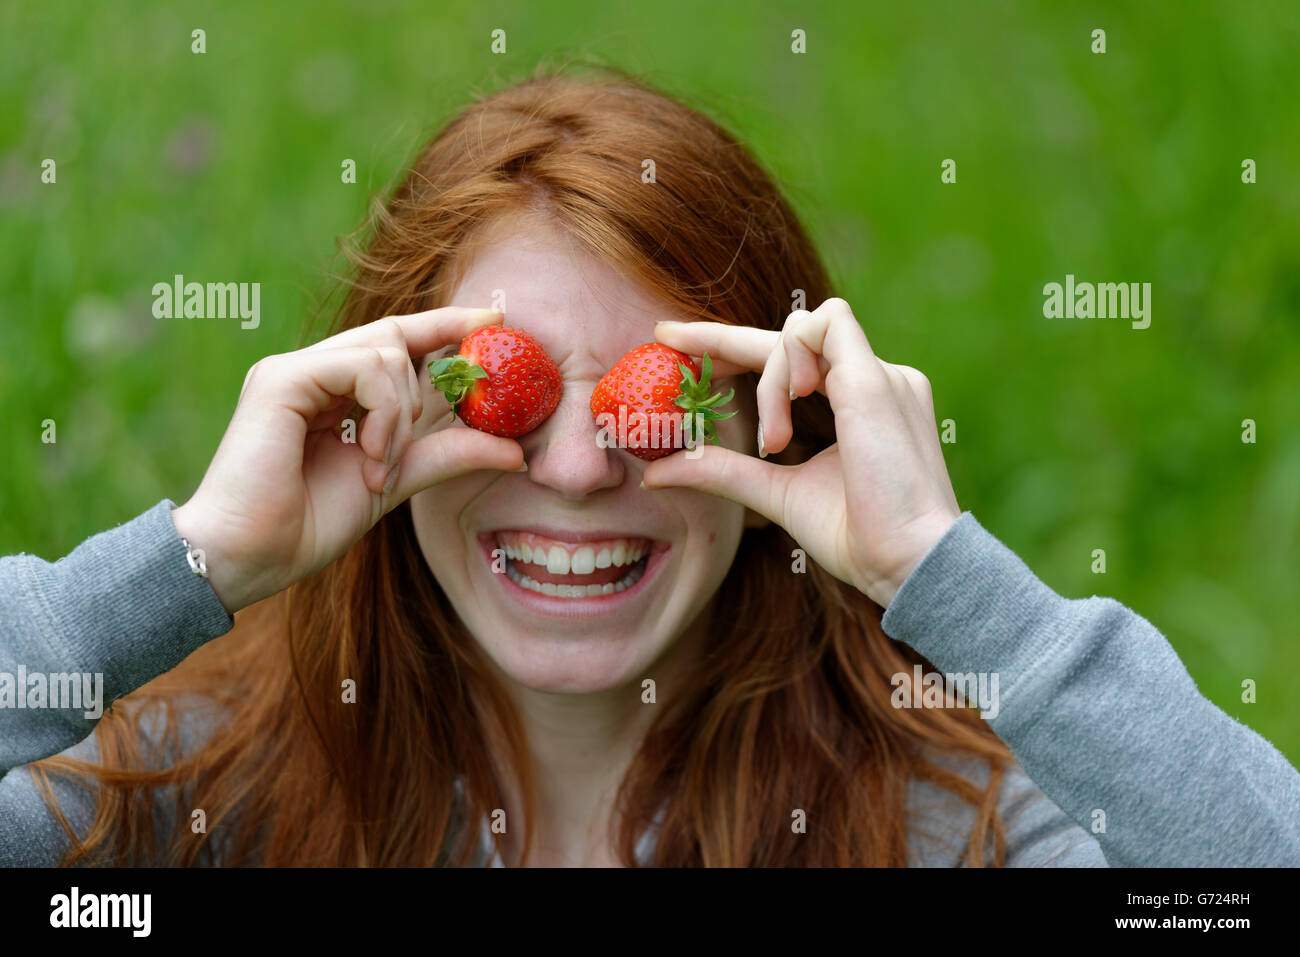 Young girl, female teenager with strawberries in front of the eyes, Bavaria, Germany Stock Photo